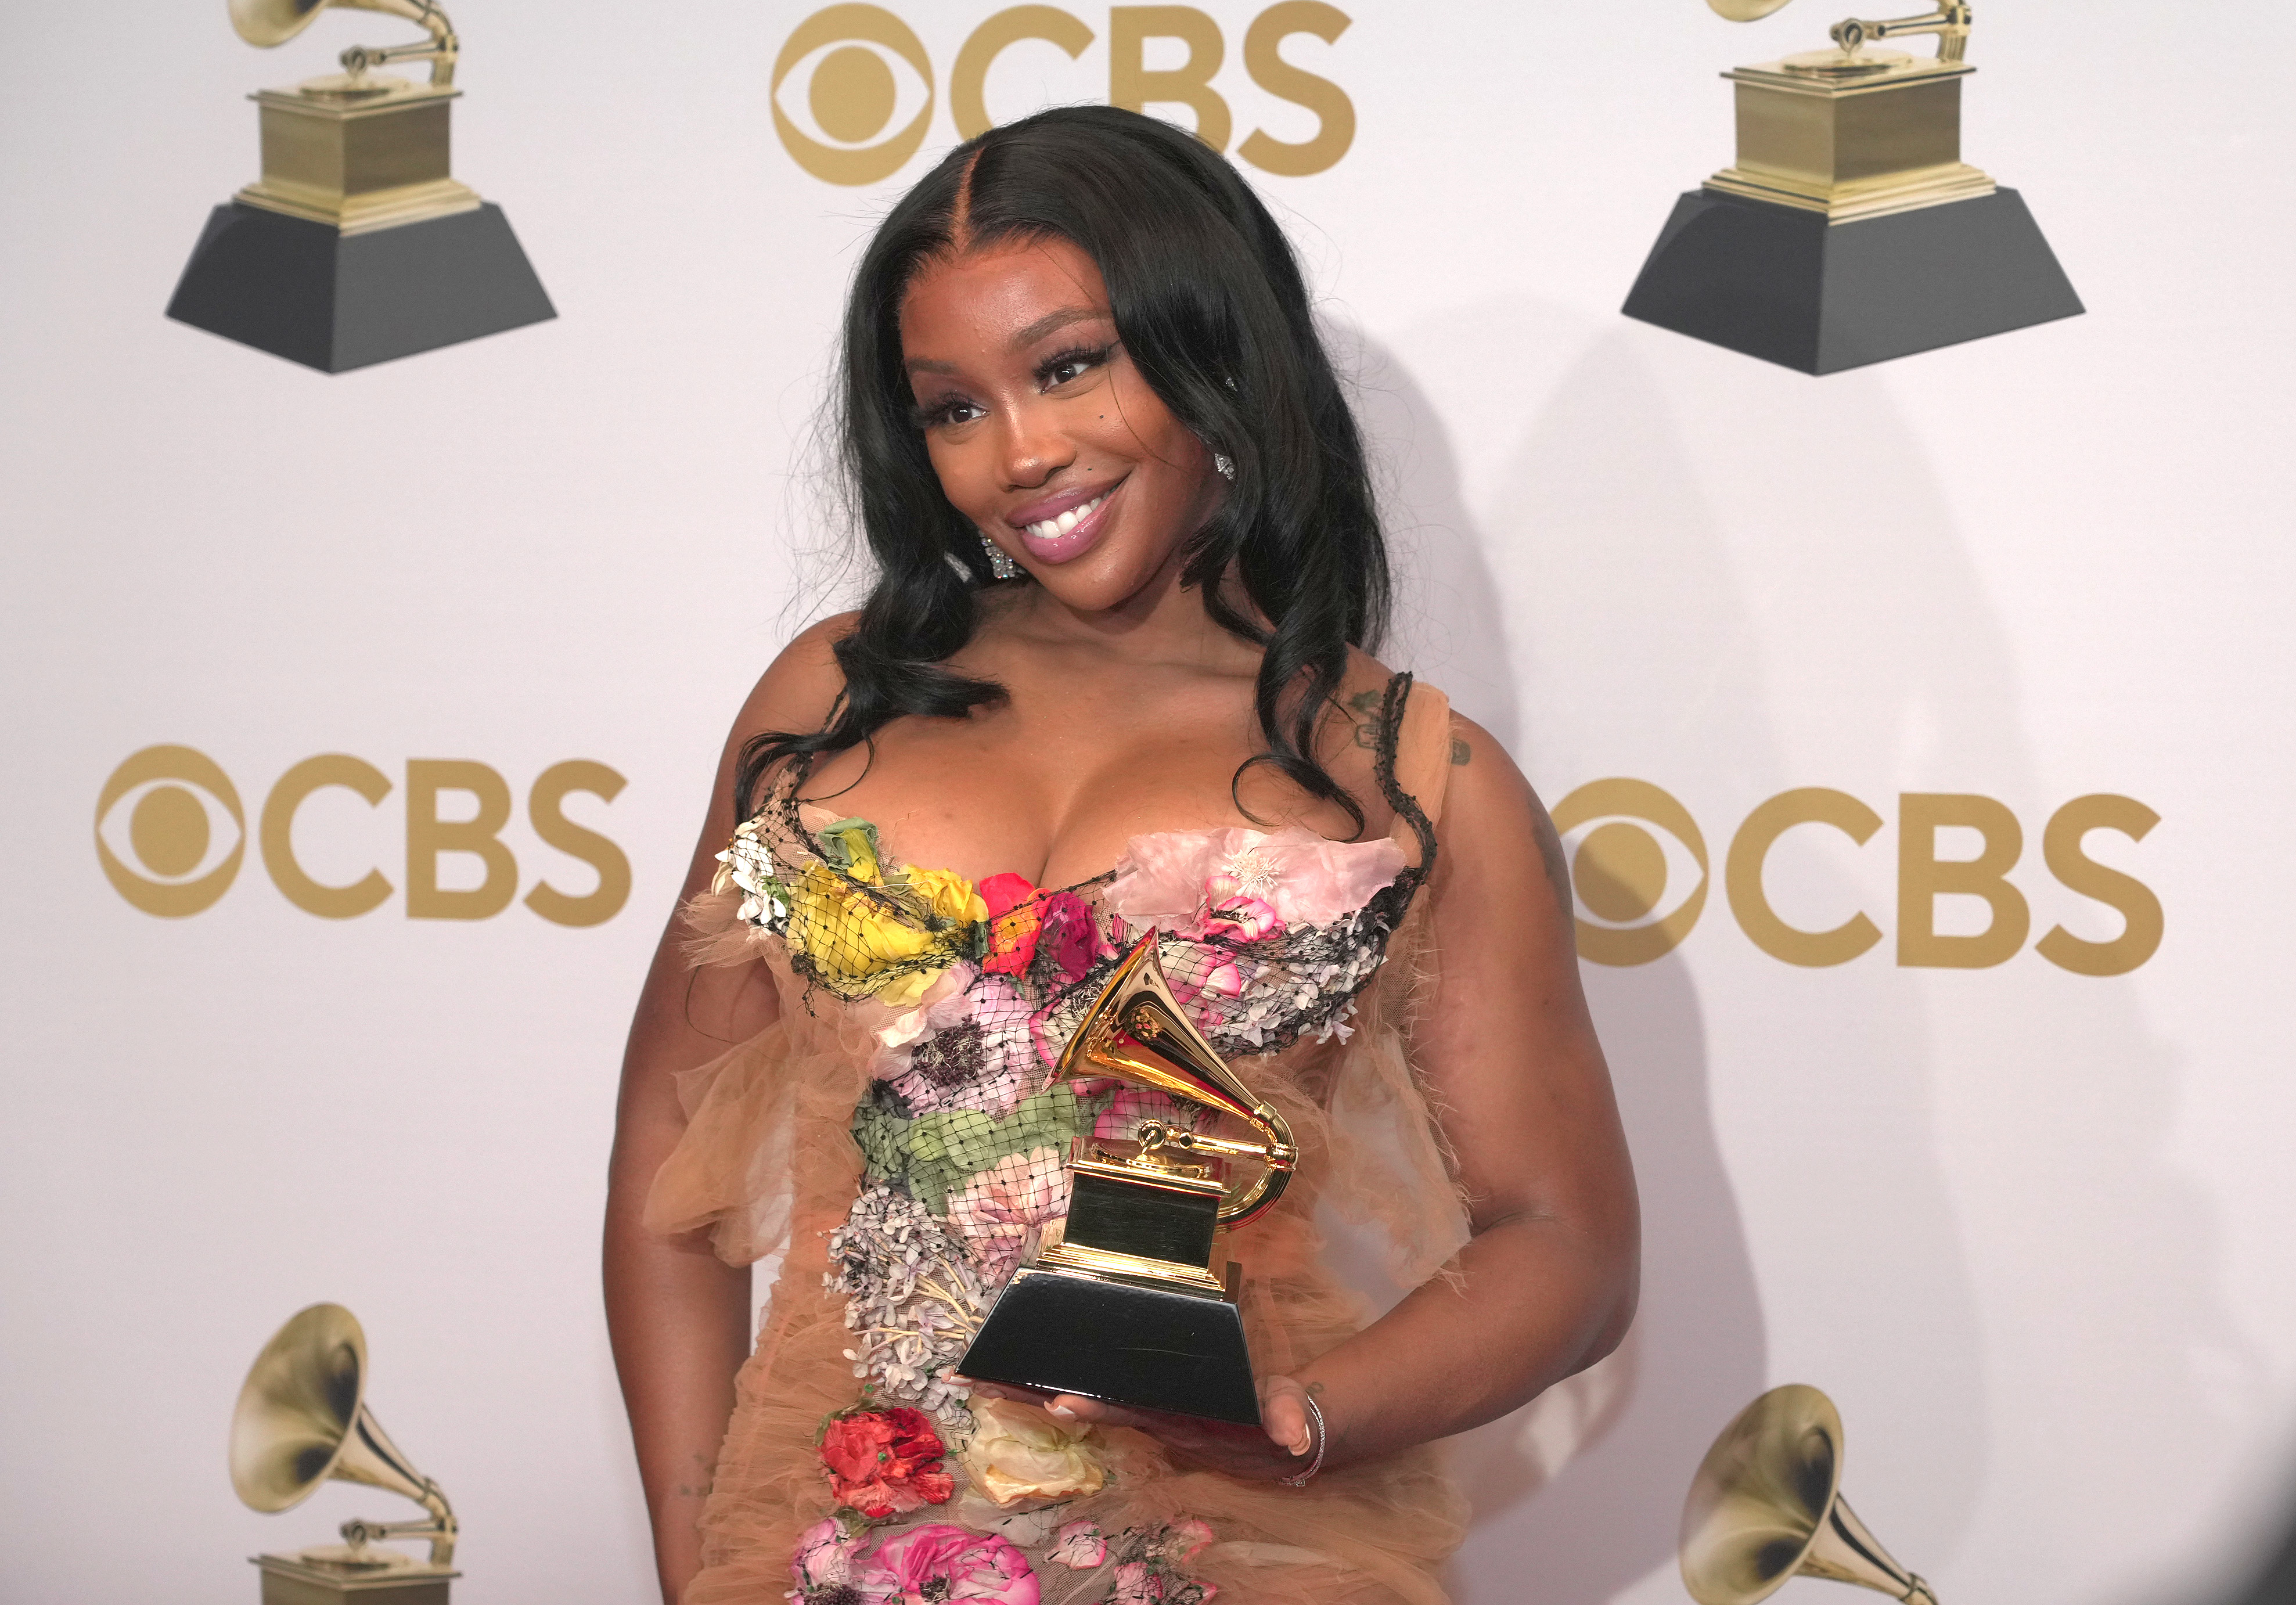 Sza posing with a Grammy Award, wearing a floral dress with sheer details